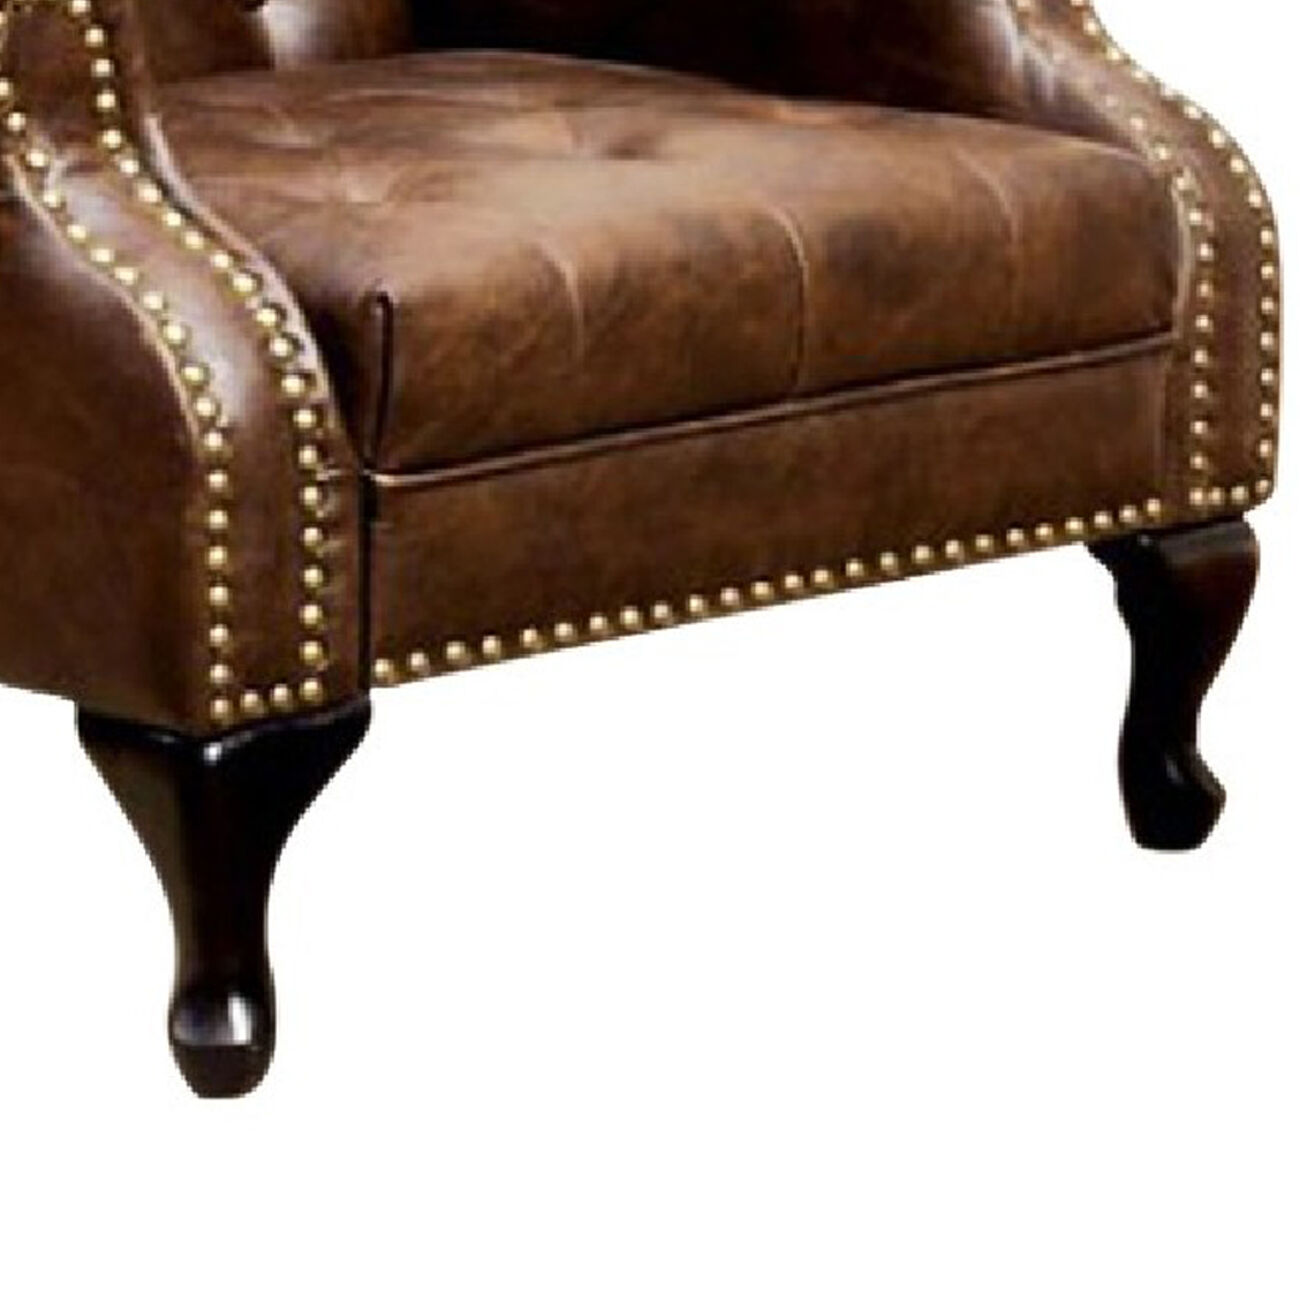 Vaugh Traditional Wing Accent Chair In Nail Head, Rustic Brown Finish